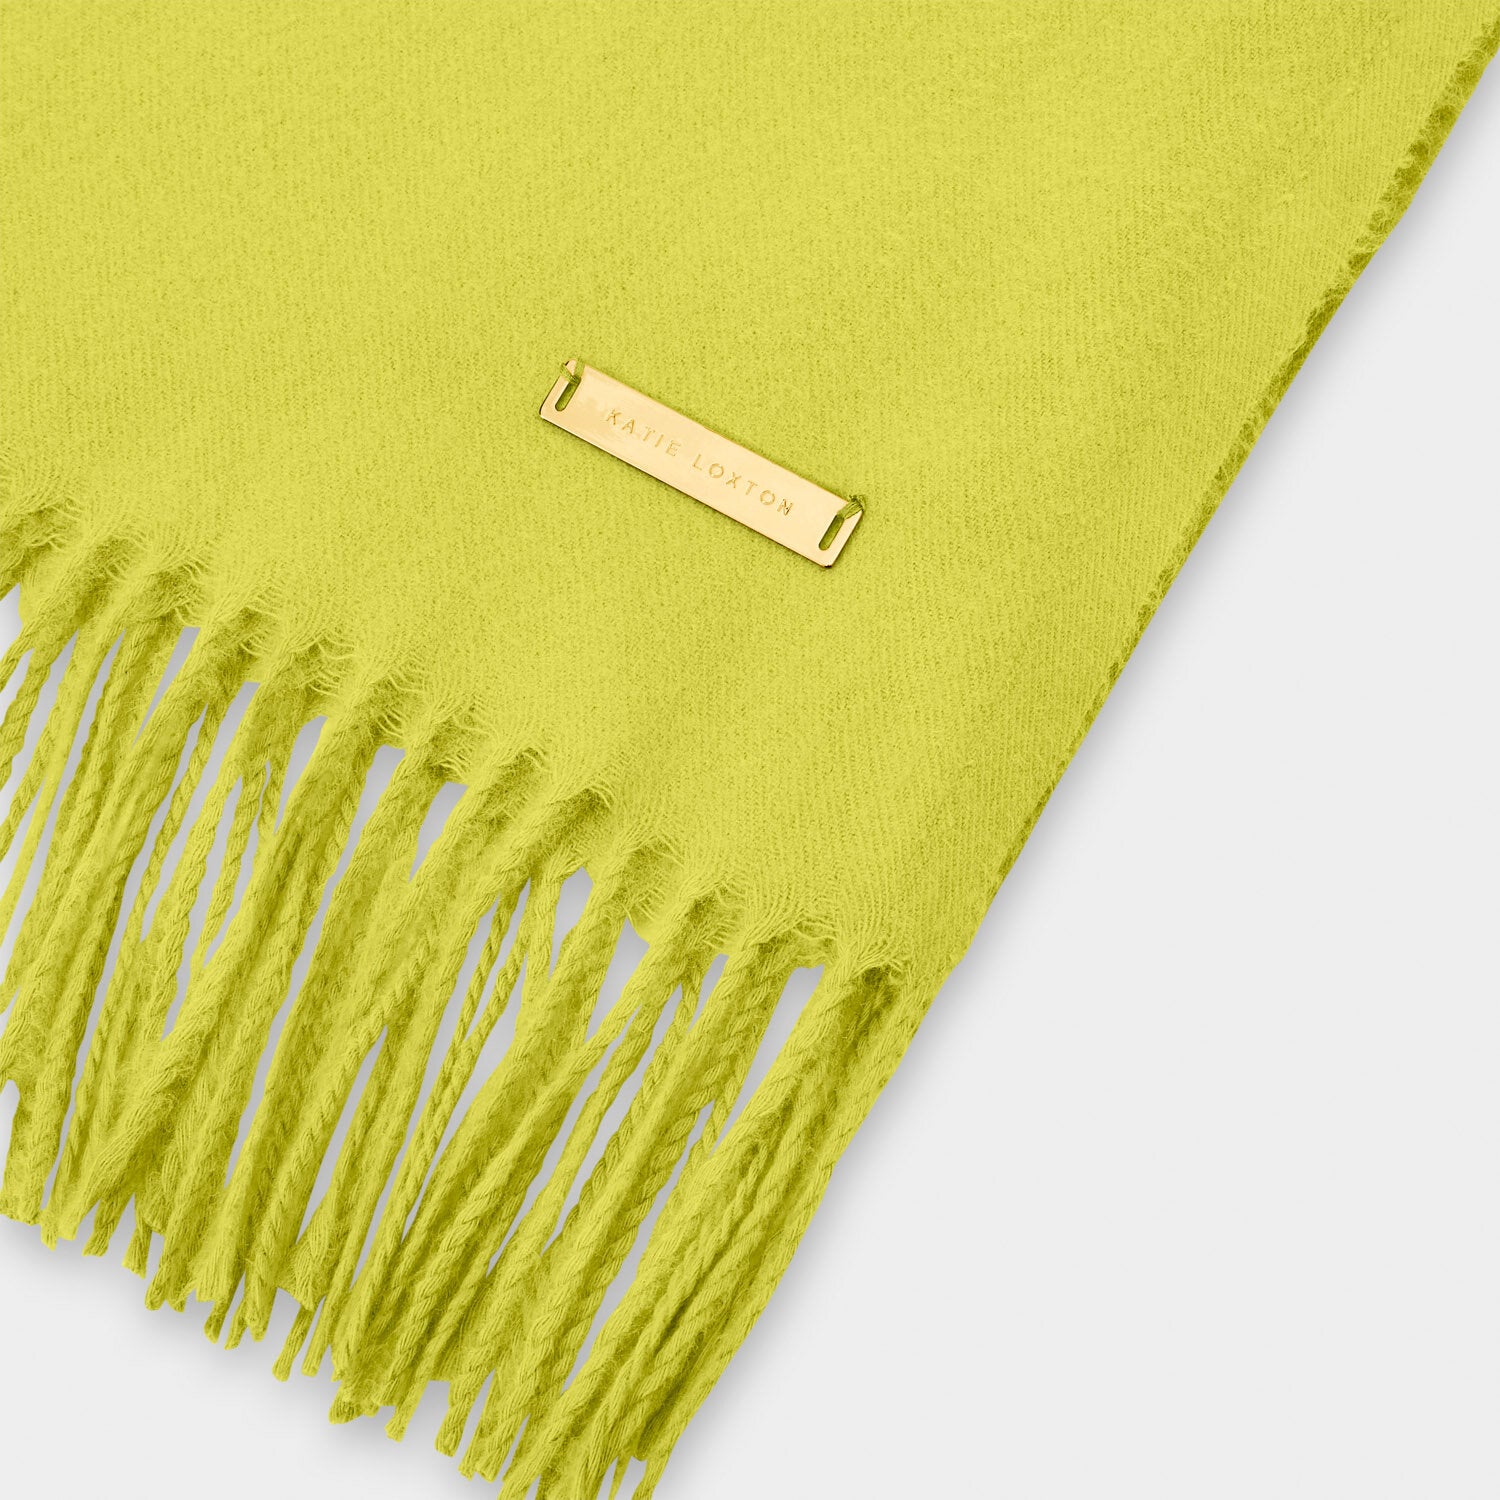 Blanket Scarf - Lime green - Katie Loxton